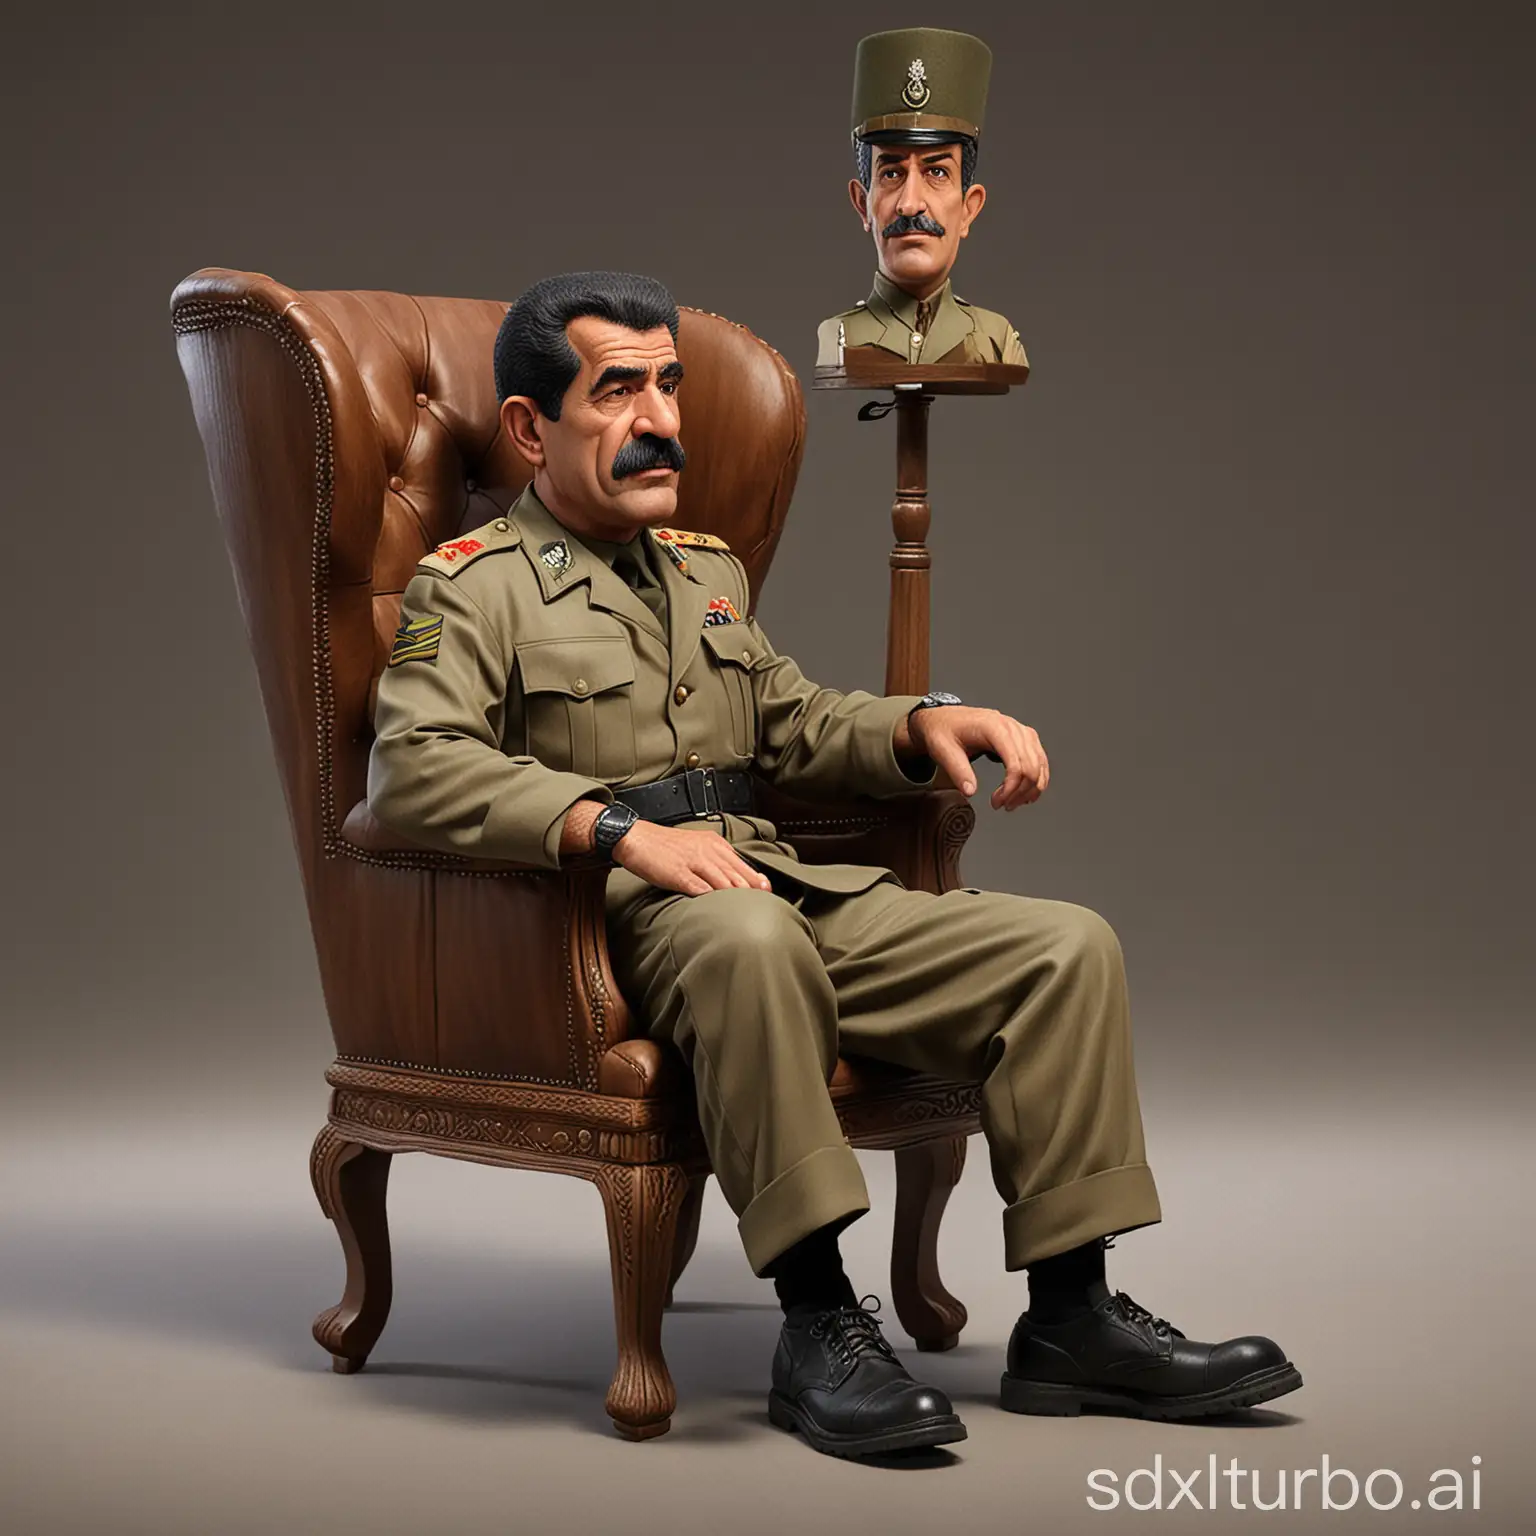 Create a Caricature 3D Realistic Cartoon style full body with a big head.  "Saddam Hussein". A 60 year old Arab man, is sitting relaxed in a classic brown wooden wingback chair, the texture of the wood is clearly visible. Wearing an Iraqi military uniform. Wearing black army shoes. Sitting with his legs crossed, his right hand holding a short wooden stick. , the left hand holding the ceeutu. The background should contrast with the color of the chair and clothing, thereby enhancing the overall image composition. Use soft photographic lighting, Lighting from above,dramatic overhead lighting, very high image quality, clear character details, UHD, 16k.